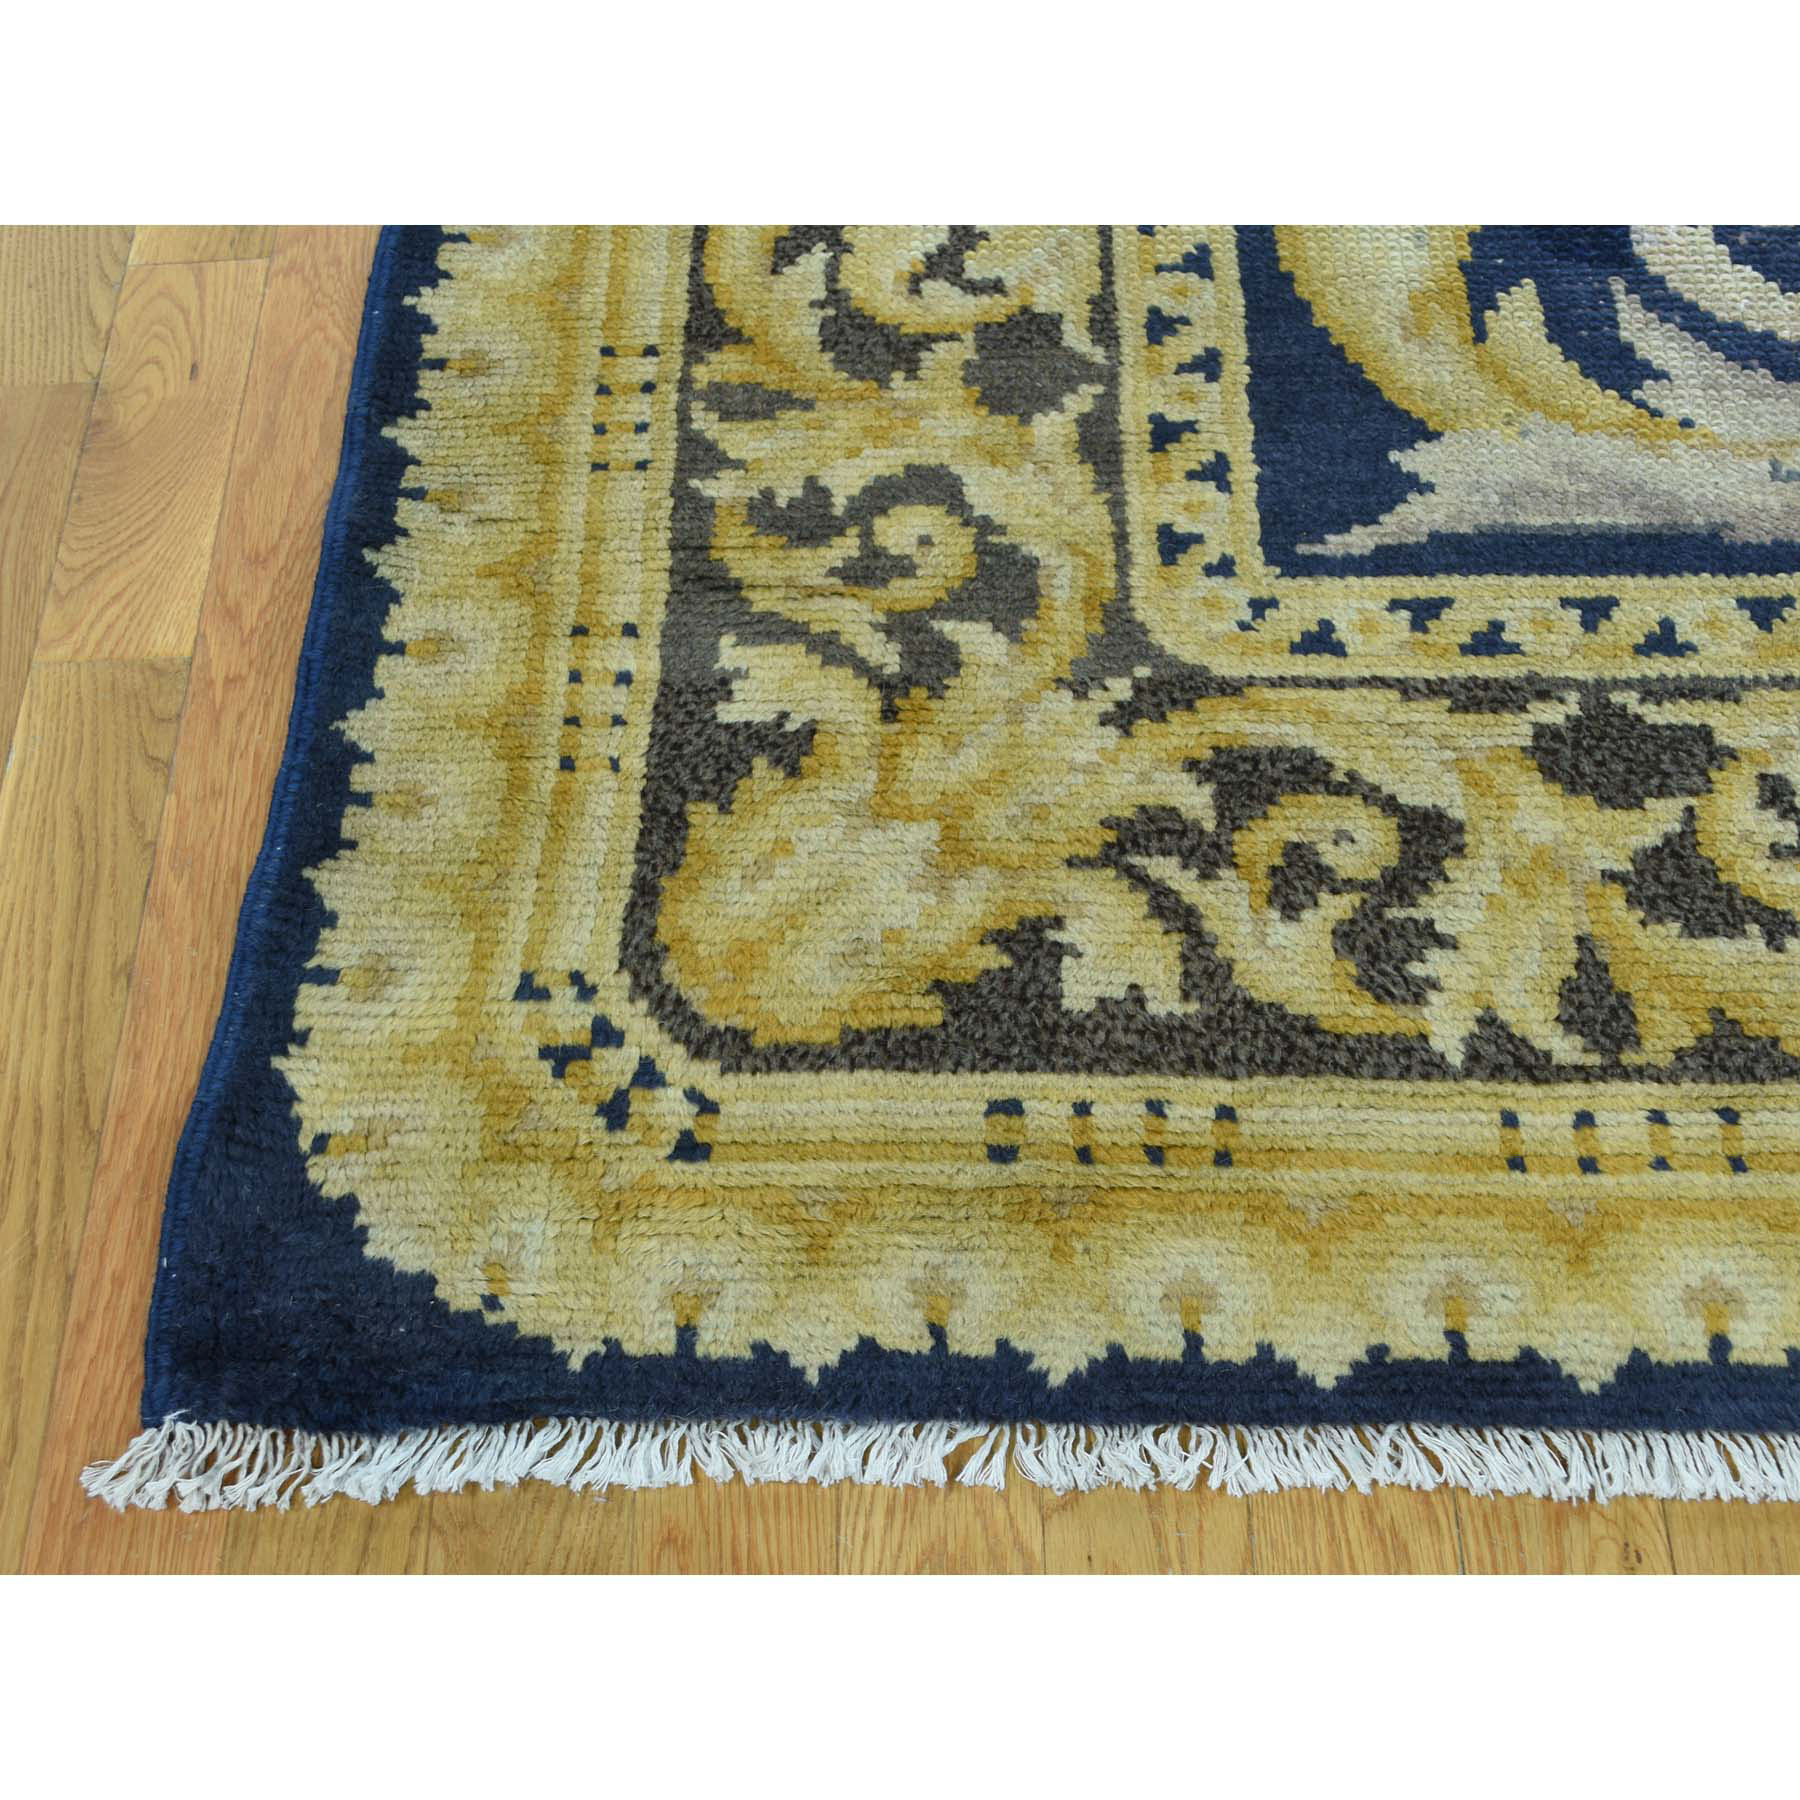 10'10"x13'8" Old Spanish Savonnerie Exc Cond Hand Woven Oversize Rug 